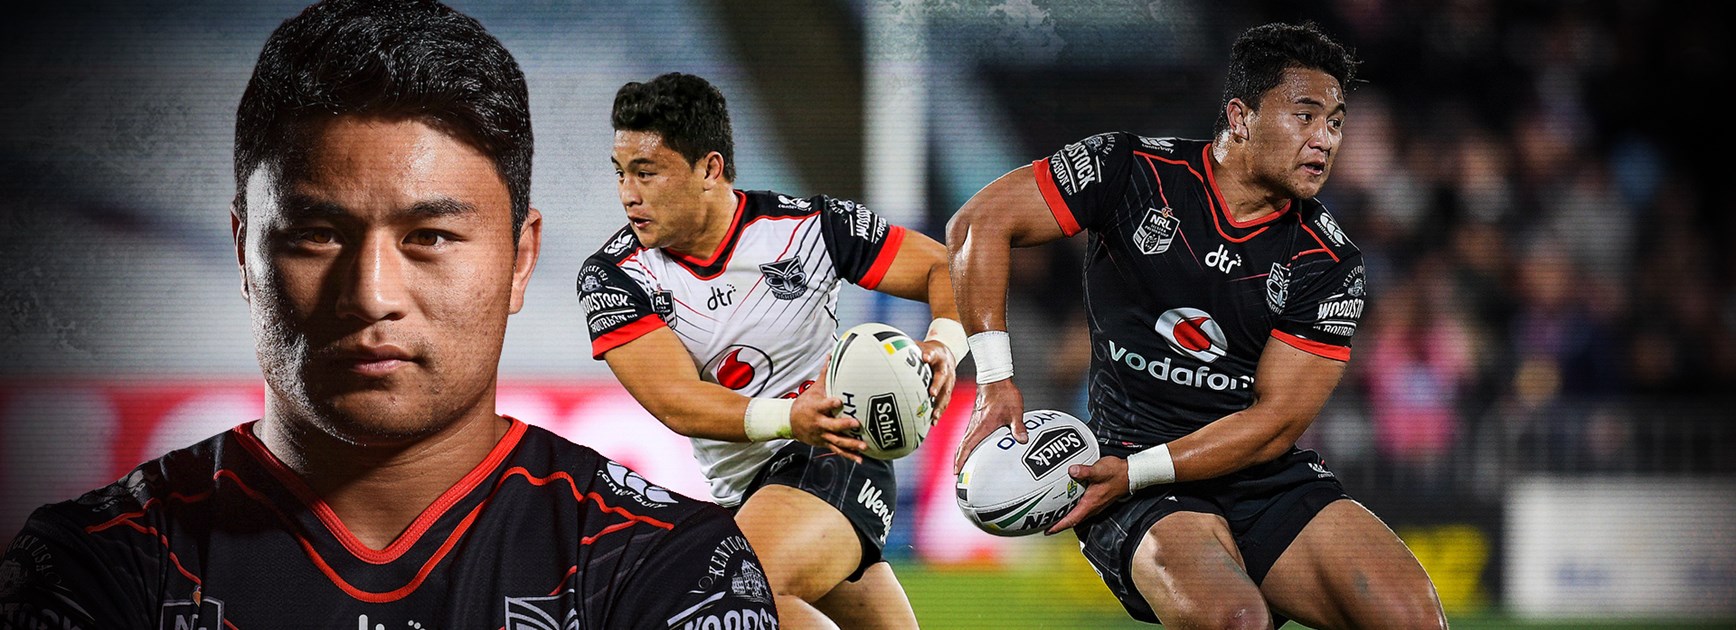 Lino granted release by Vodafone Warriors